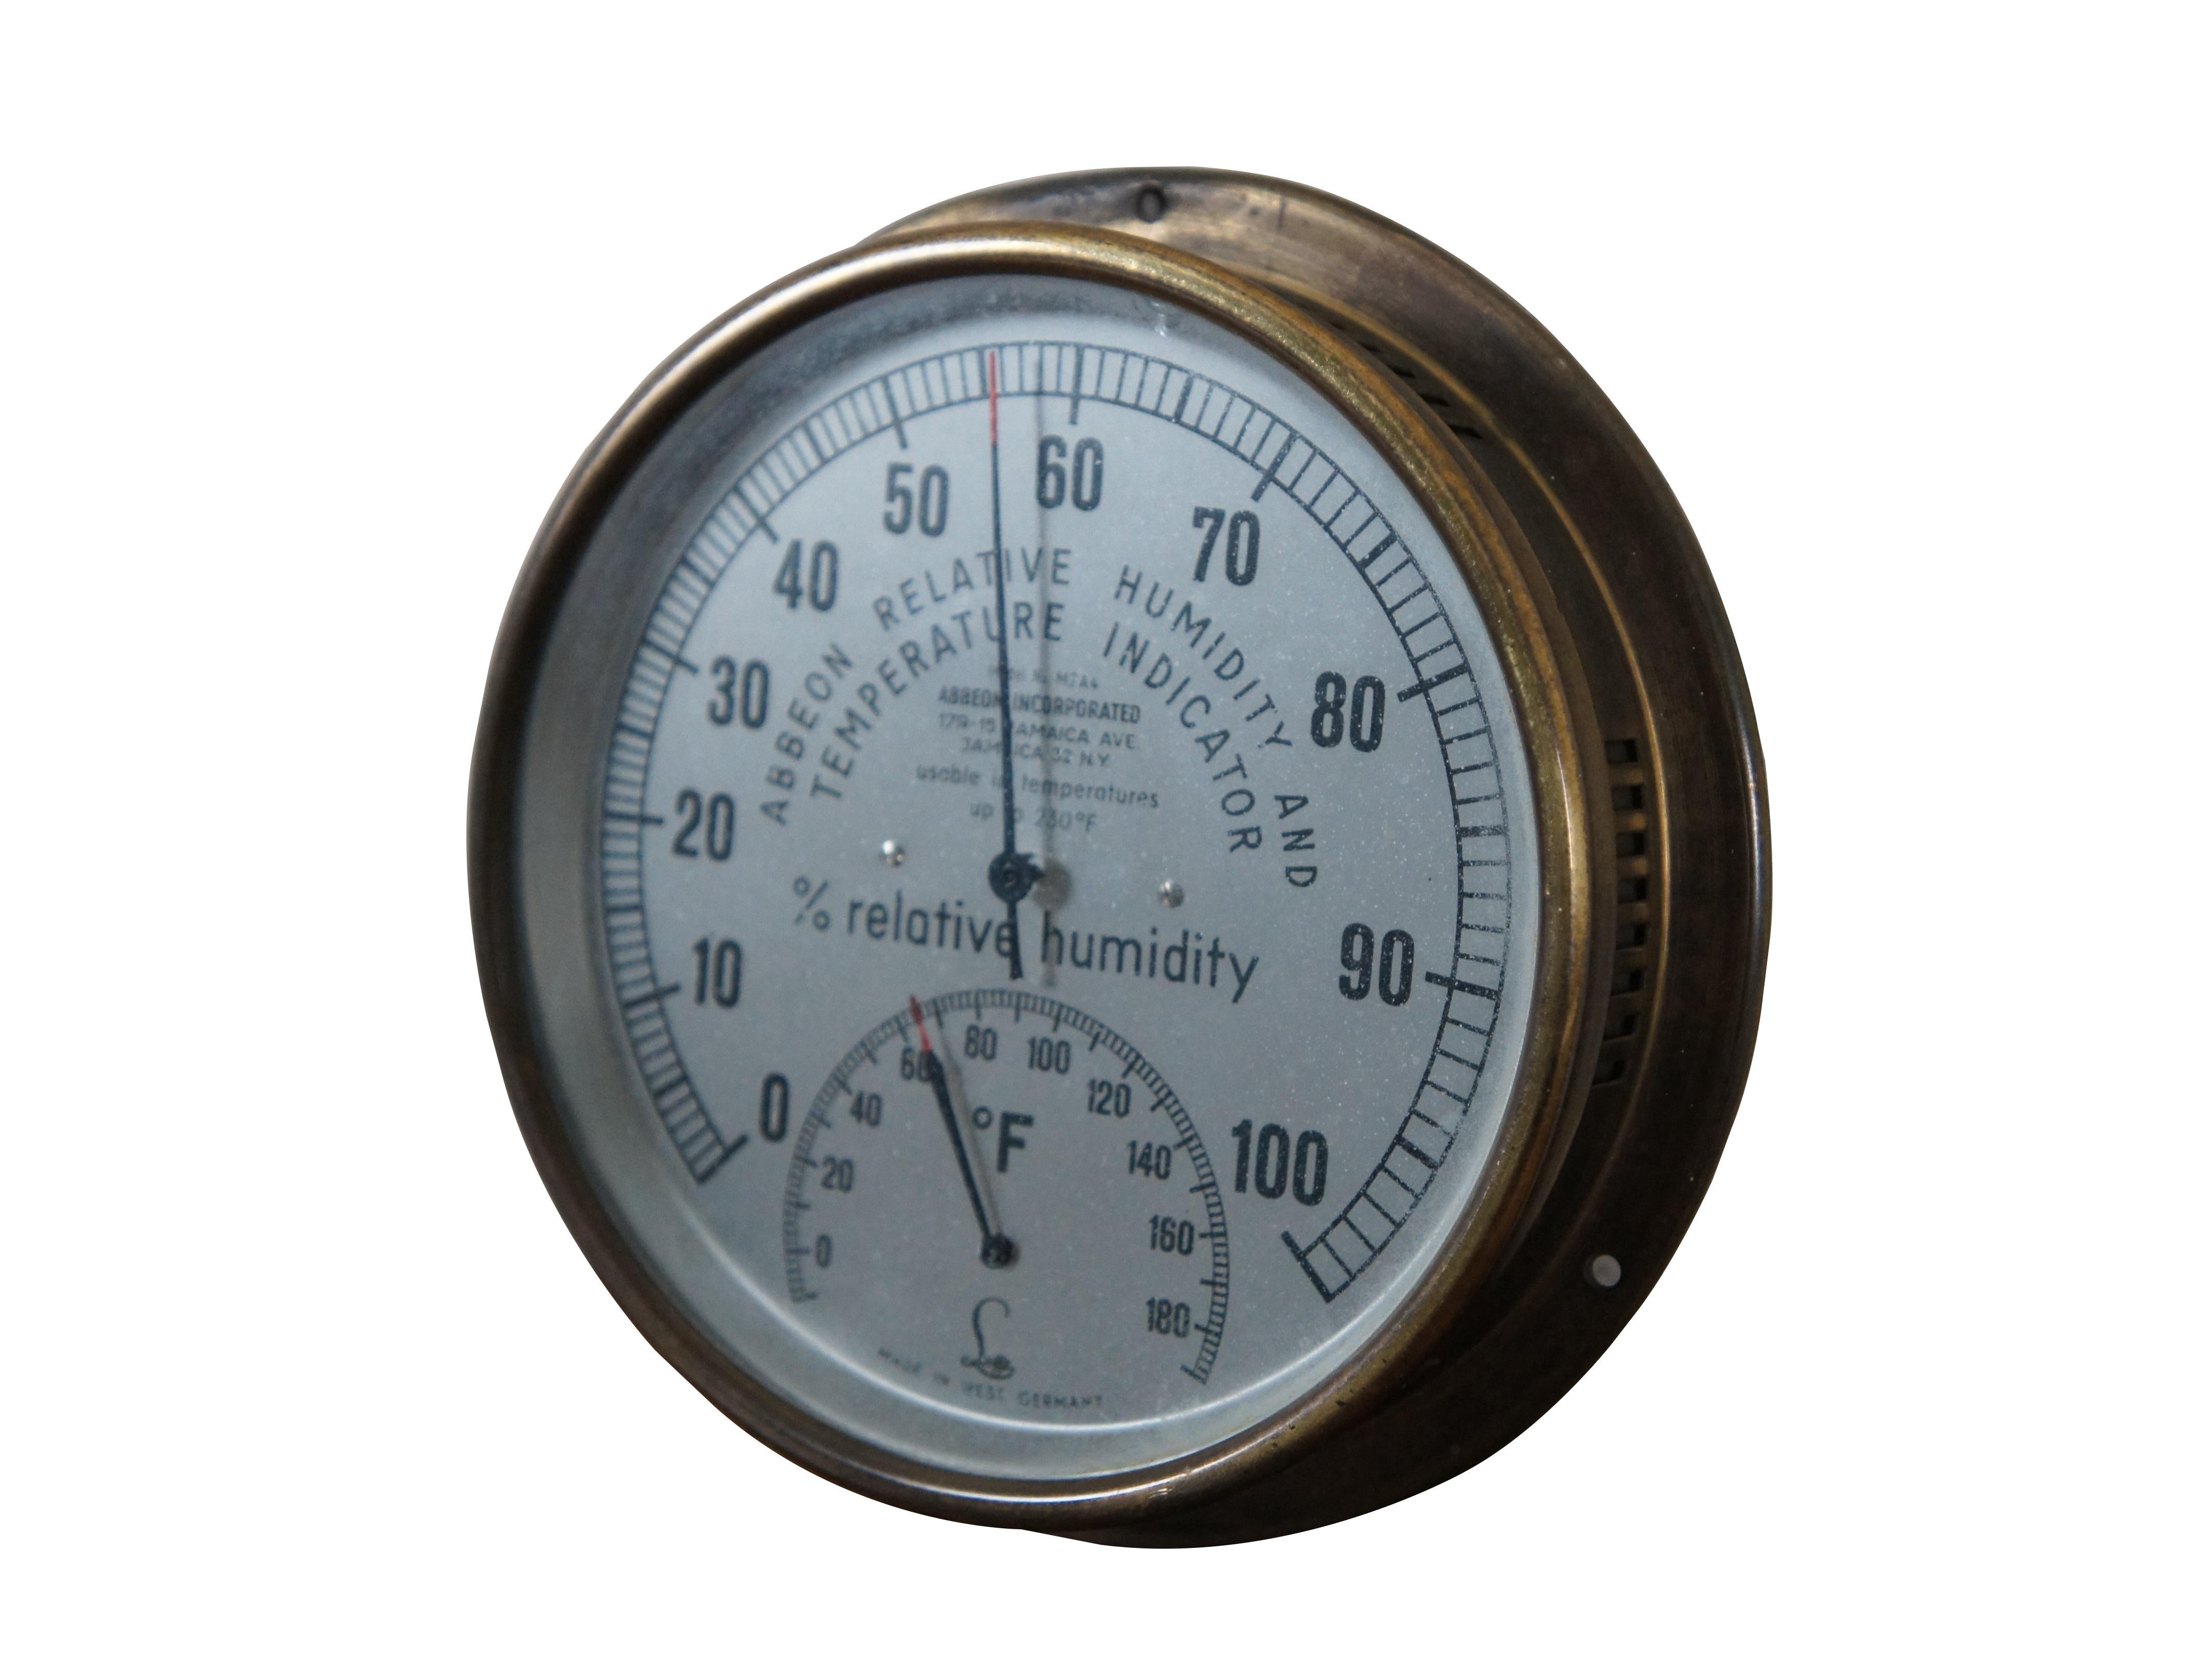 Mid 20th century Abbeon Relative Humidity and Temperature Indicator (hygrometer), Model No. M2A4. Lufft - Made in West Germany. Previously owned by the Pathology Department at U of U (University of Utah). Features a brass casing and white face with